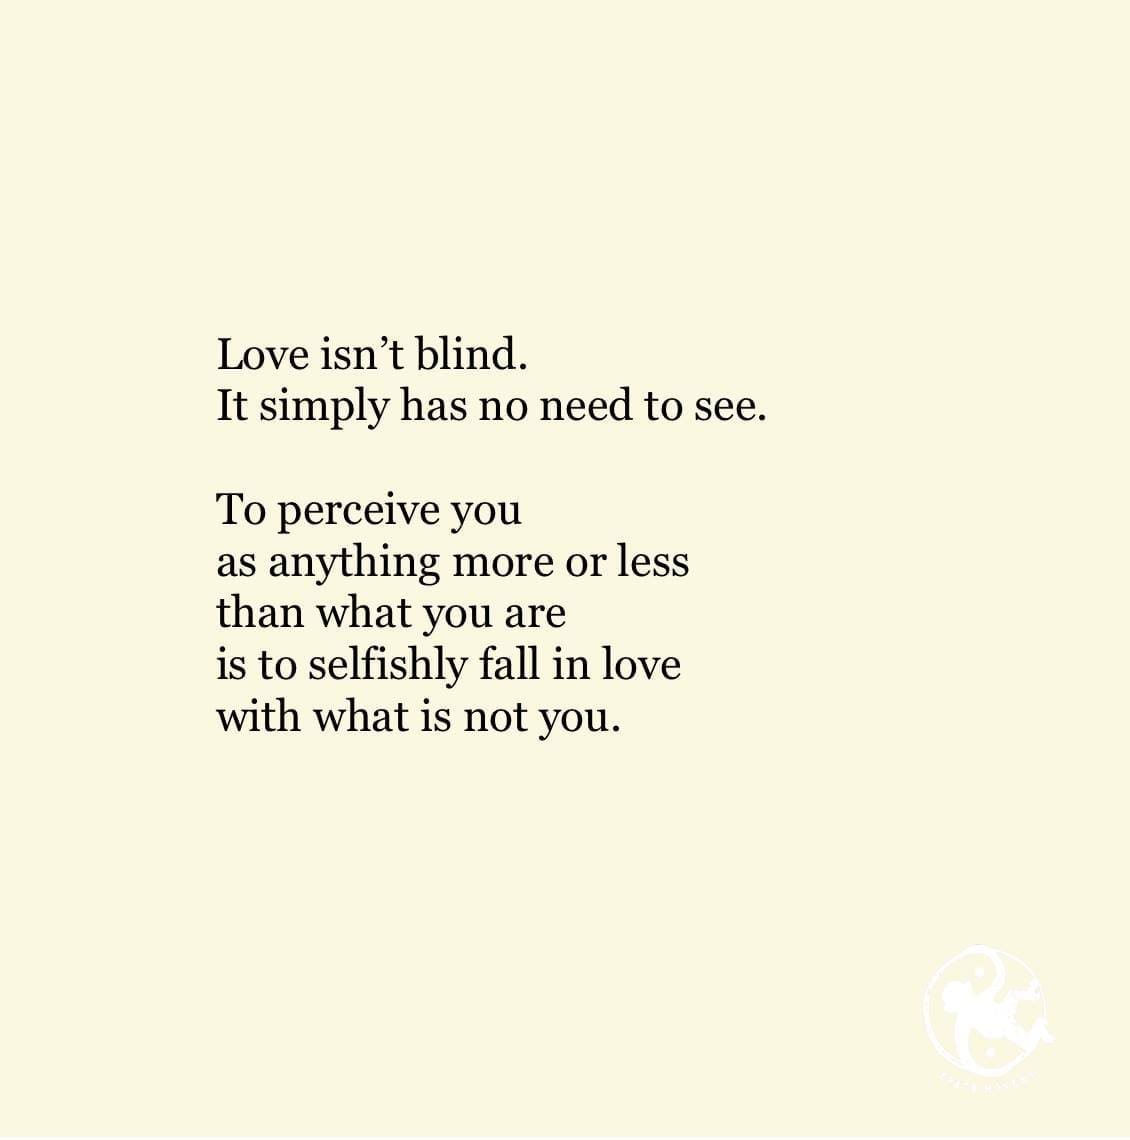 Love isn’t blind. It simply has no need to see.  To perceive you as anything more or less than what you are is to selfishly fall in love with what is not you.